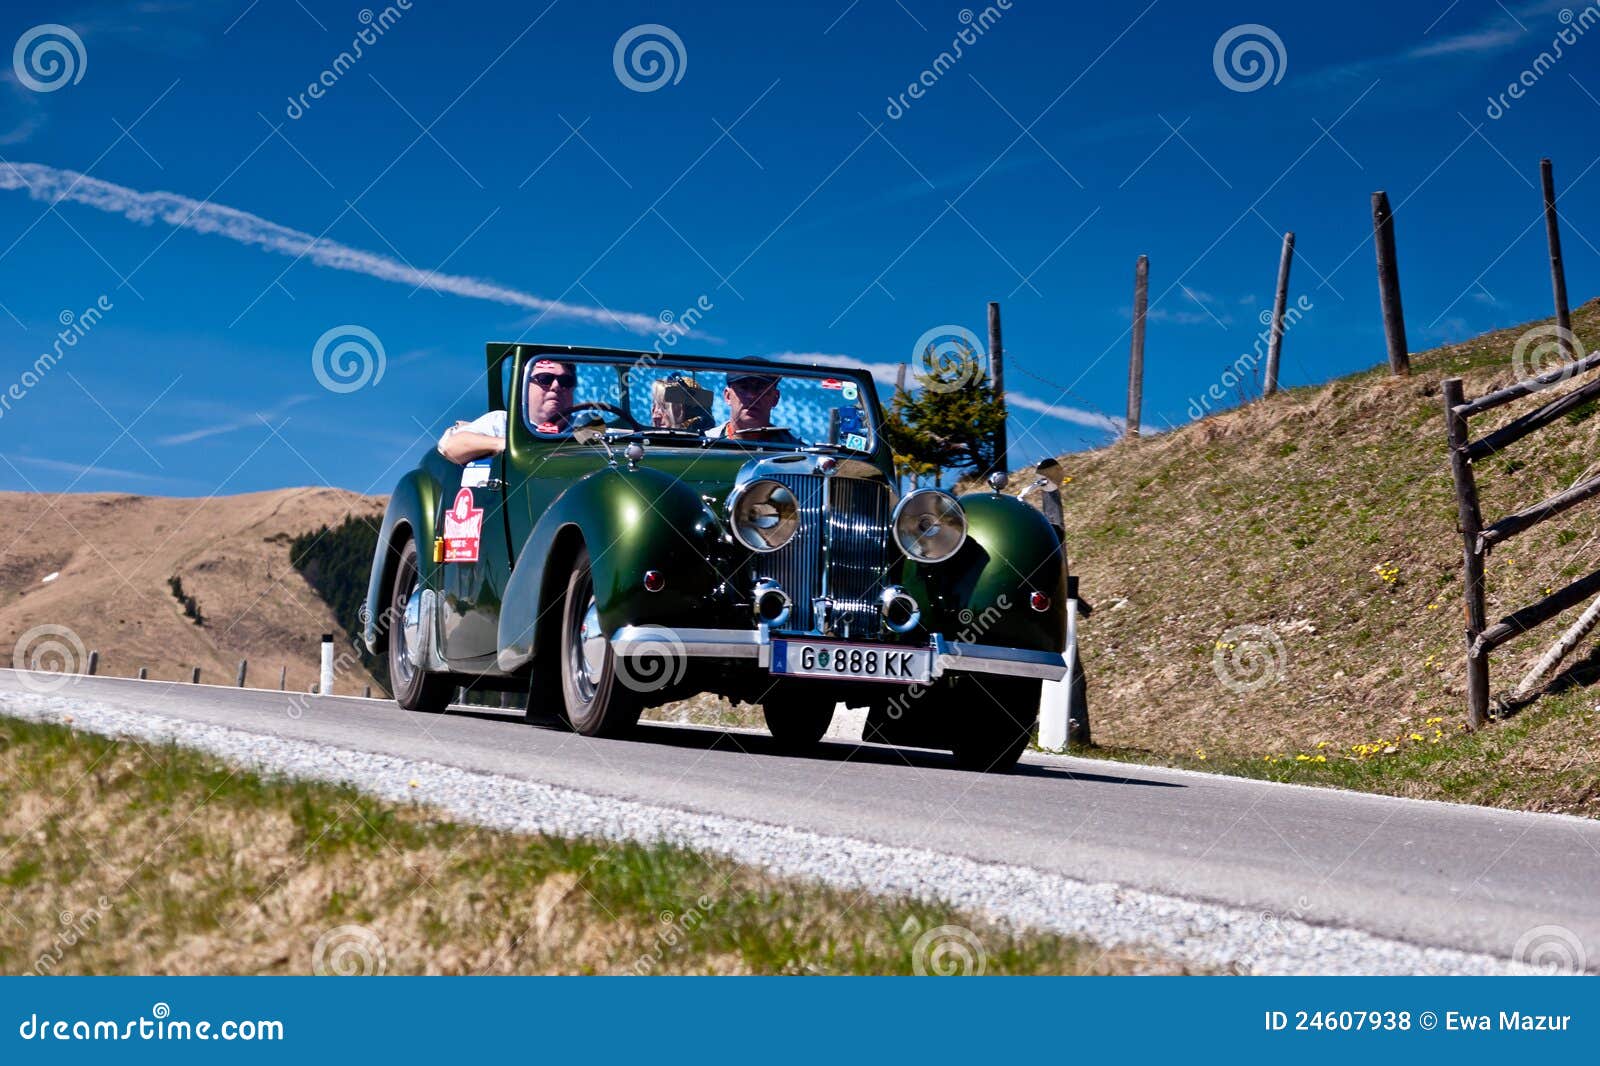 Vintage car editorial stock photo. Image of competition - 24607938